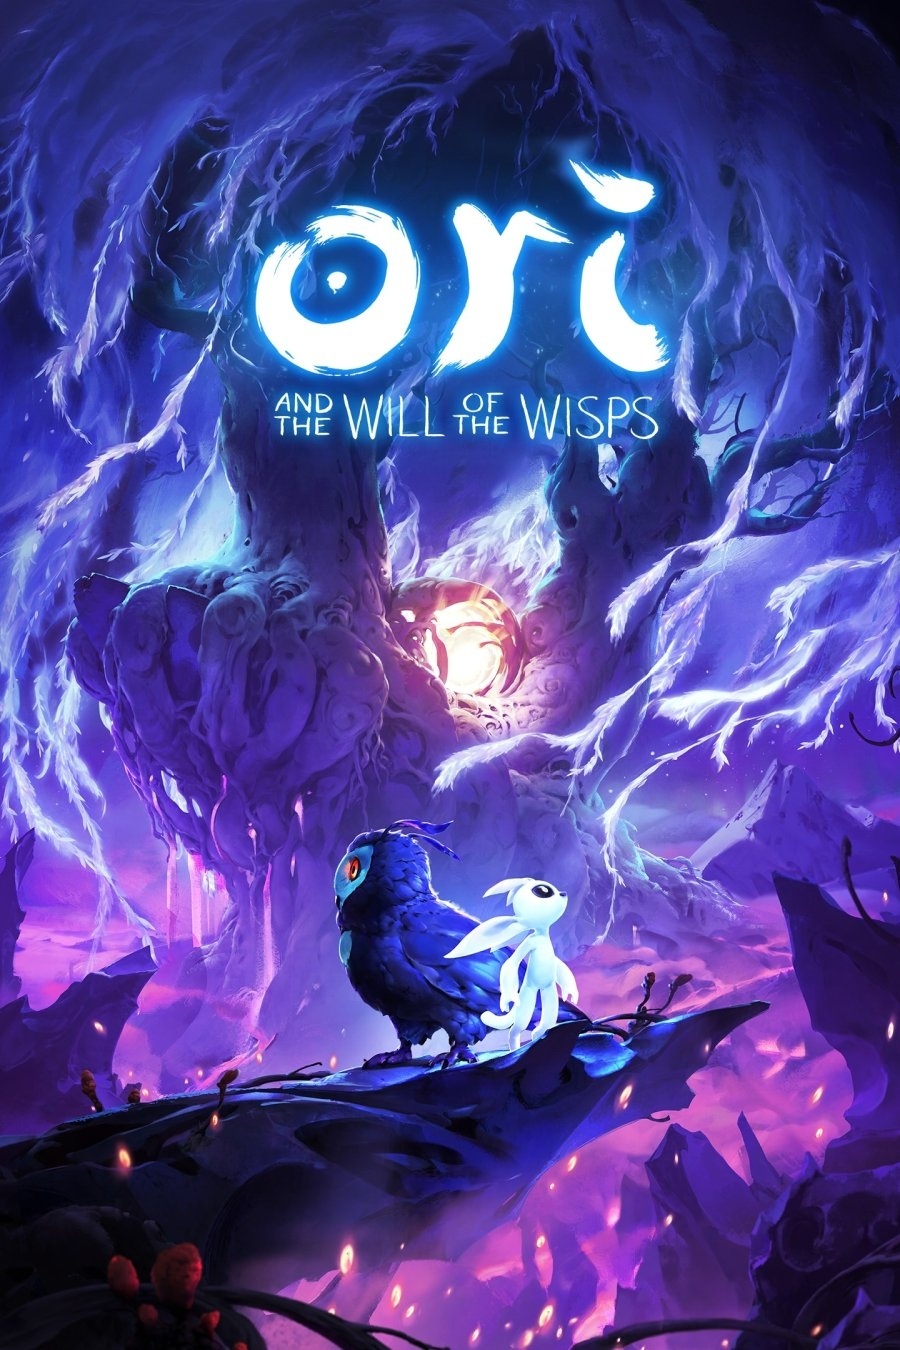 Capa do jogo Ori and the Will of the Wisps